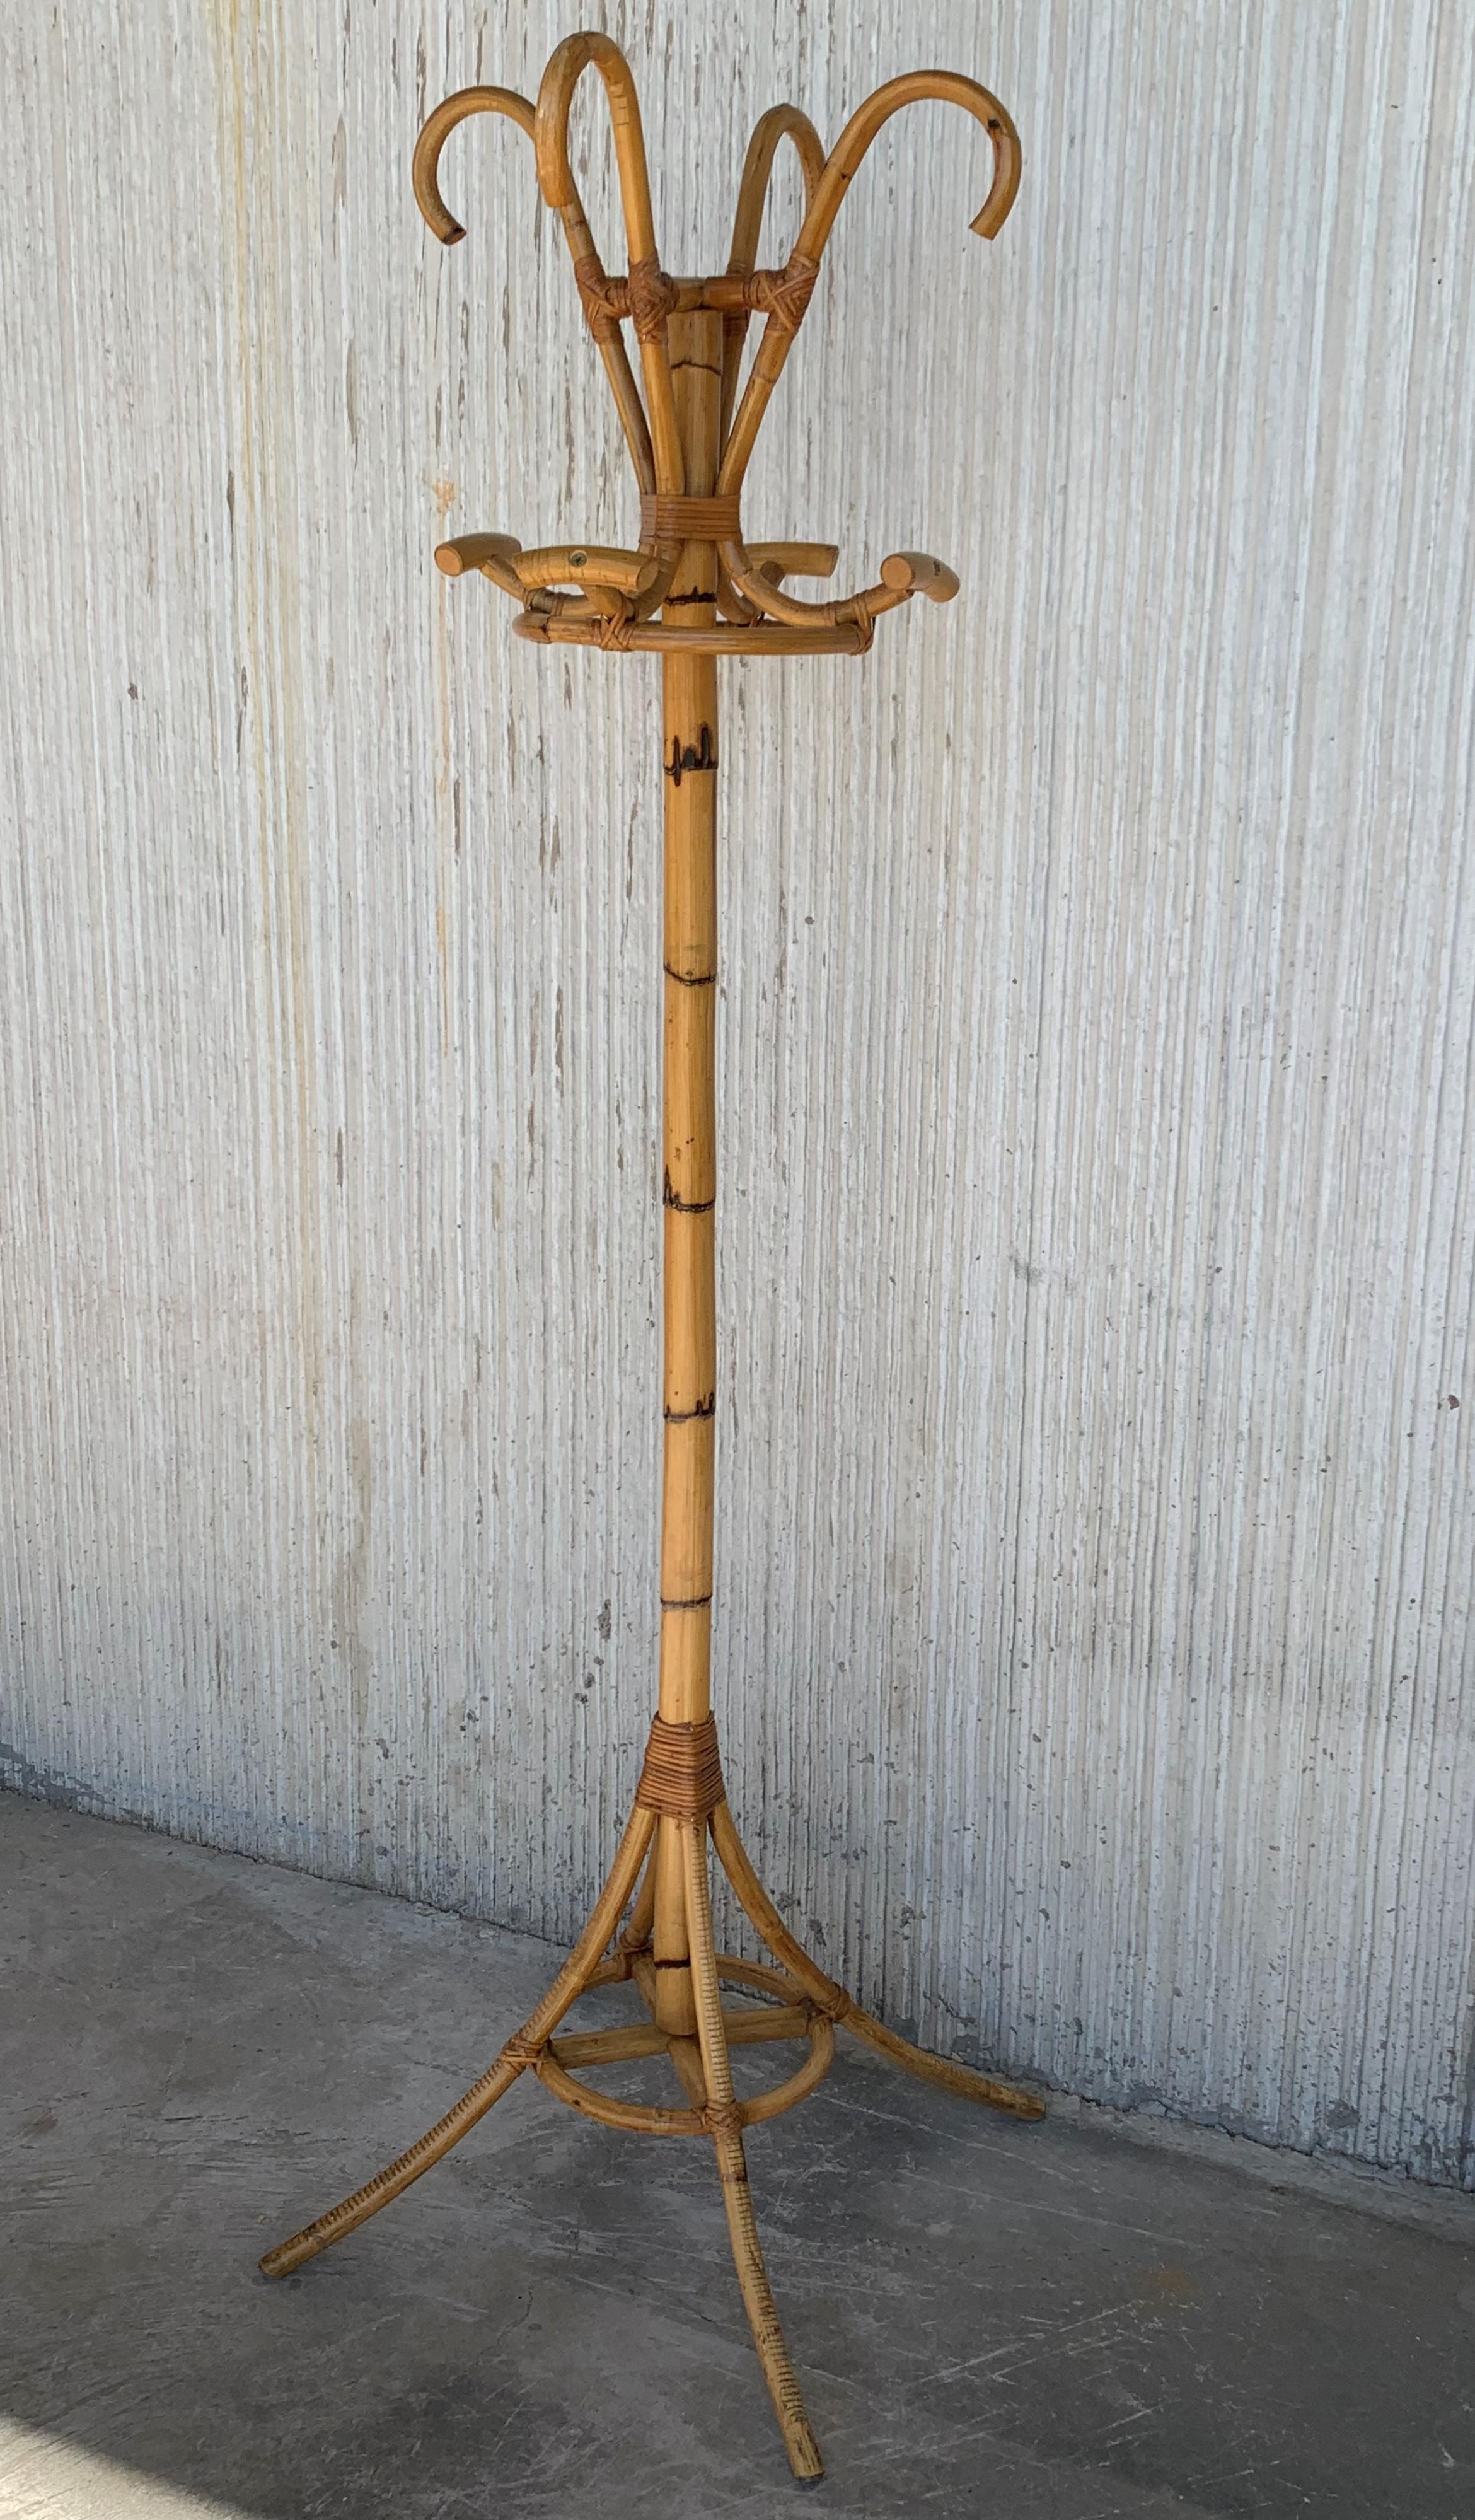 Fun and quirky vintage coat rack or stand made from stained bamboo. Four double hooks serve as coat or hat hooks. Central rod is stabilized at floor with four legs and decorative ring.